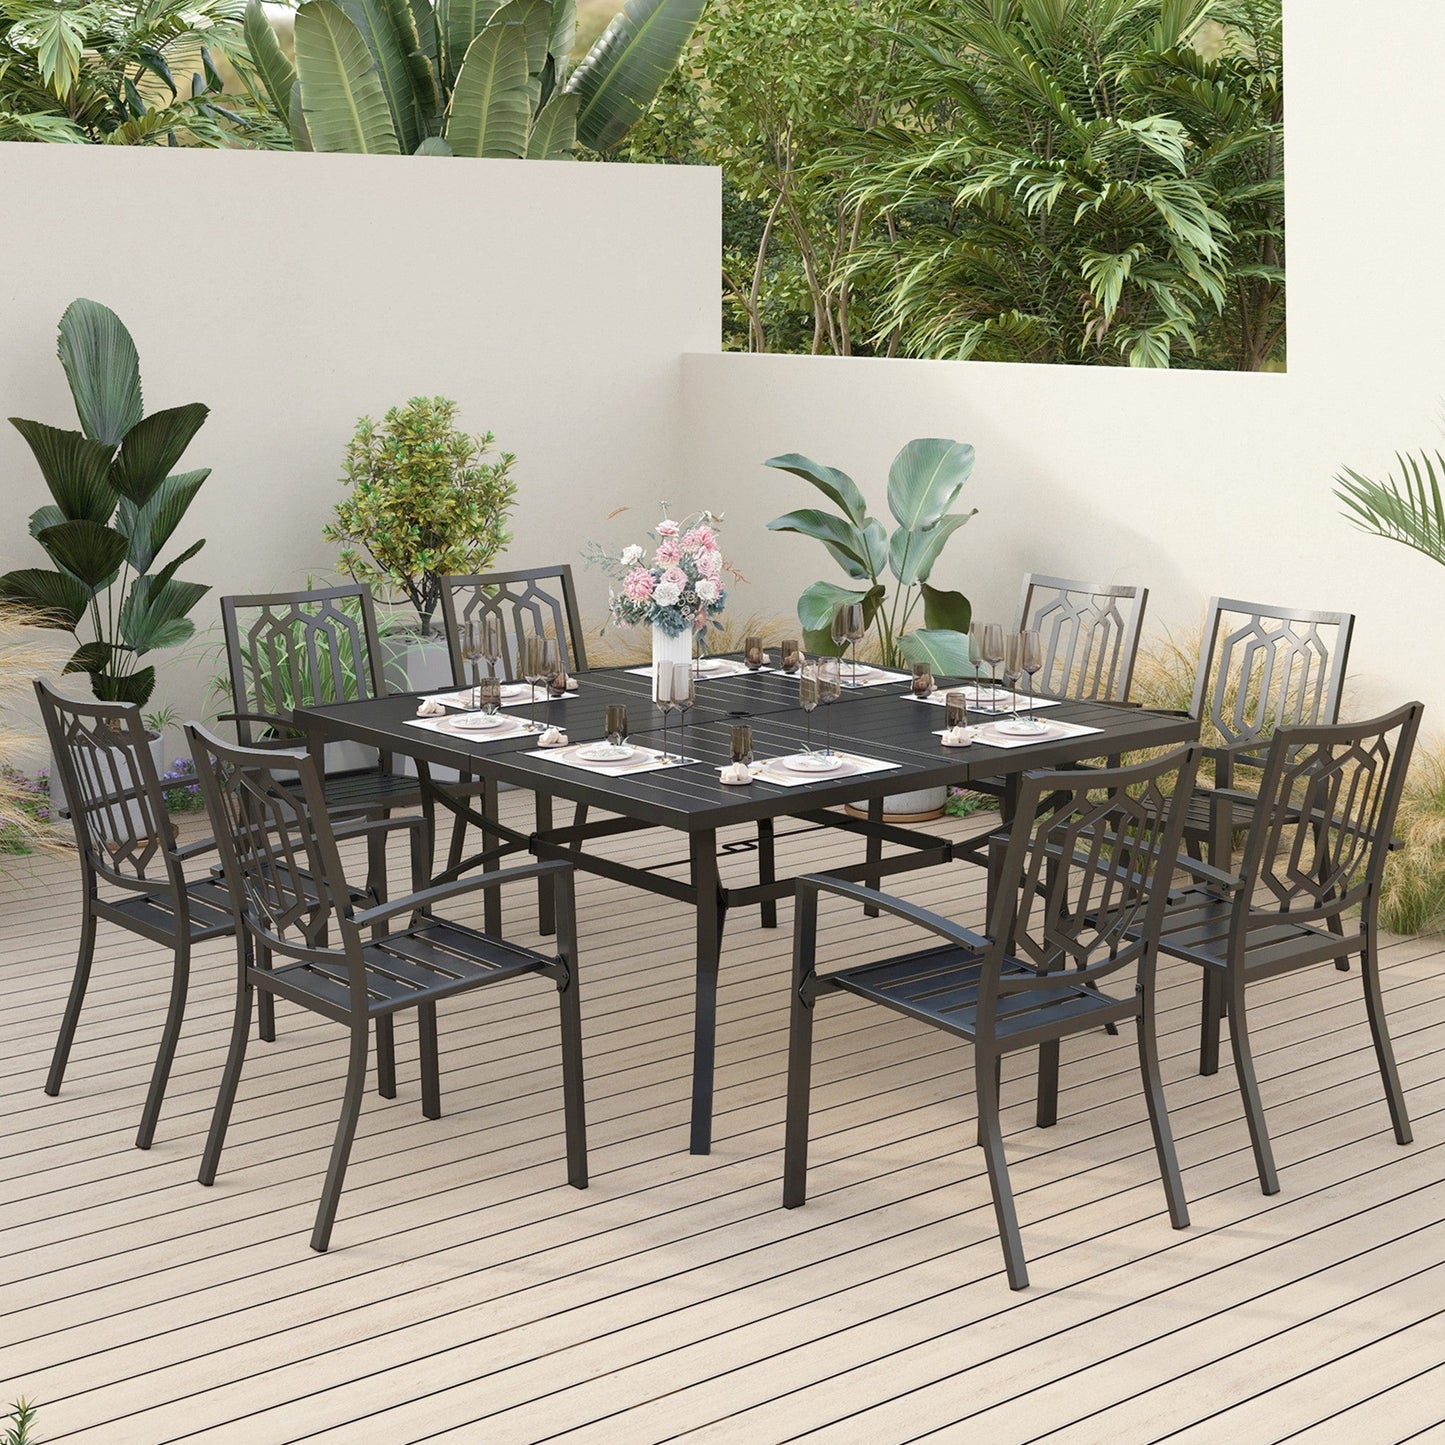 Sophia & William 9 Piece Outdoor Metal Patio Dining Set Square Table and Chairs Set, Black